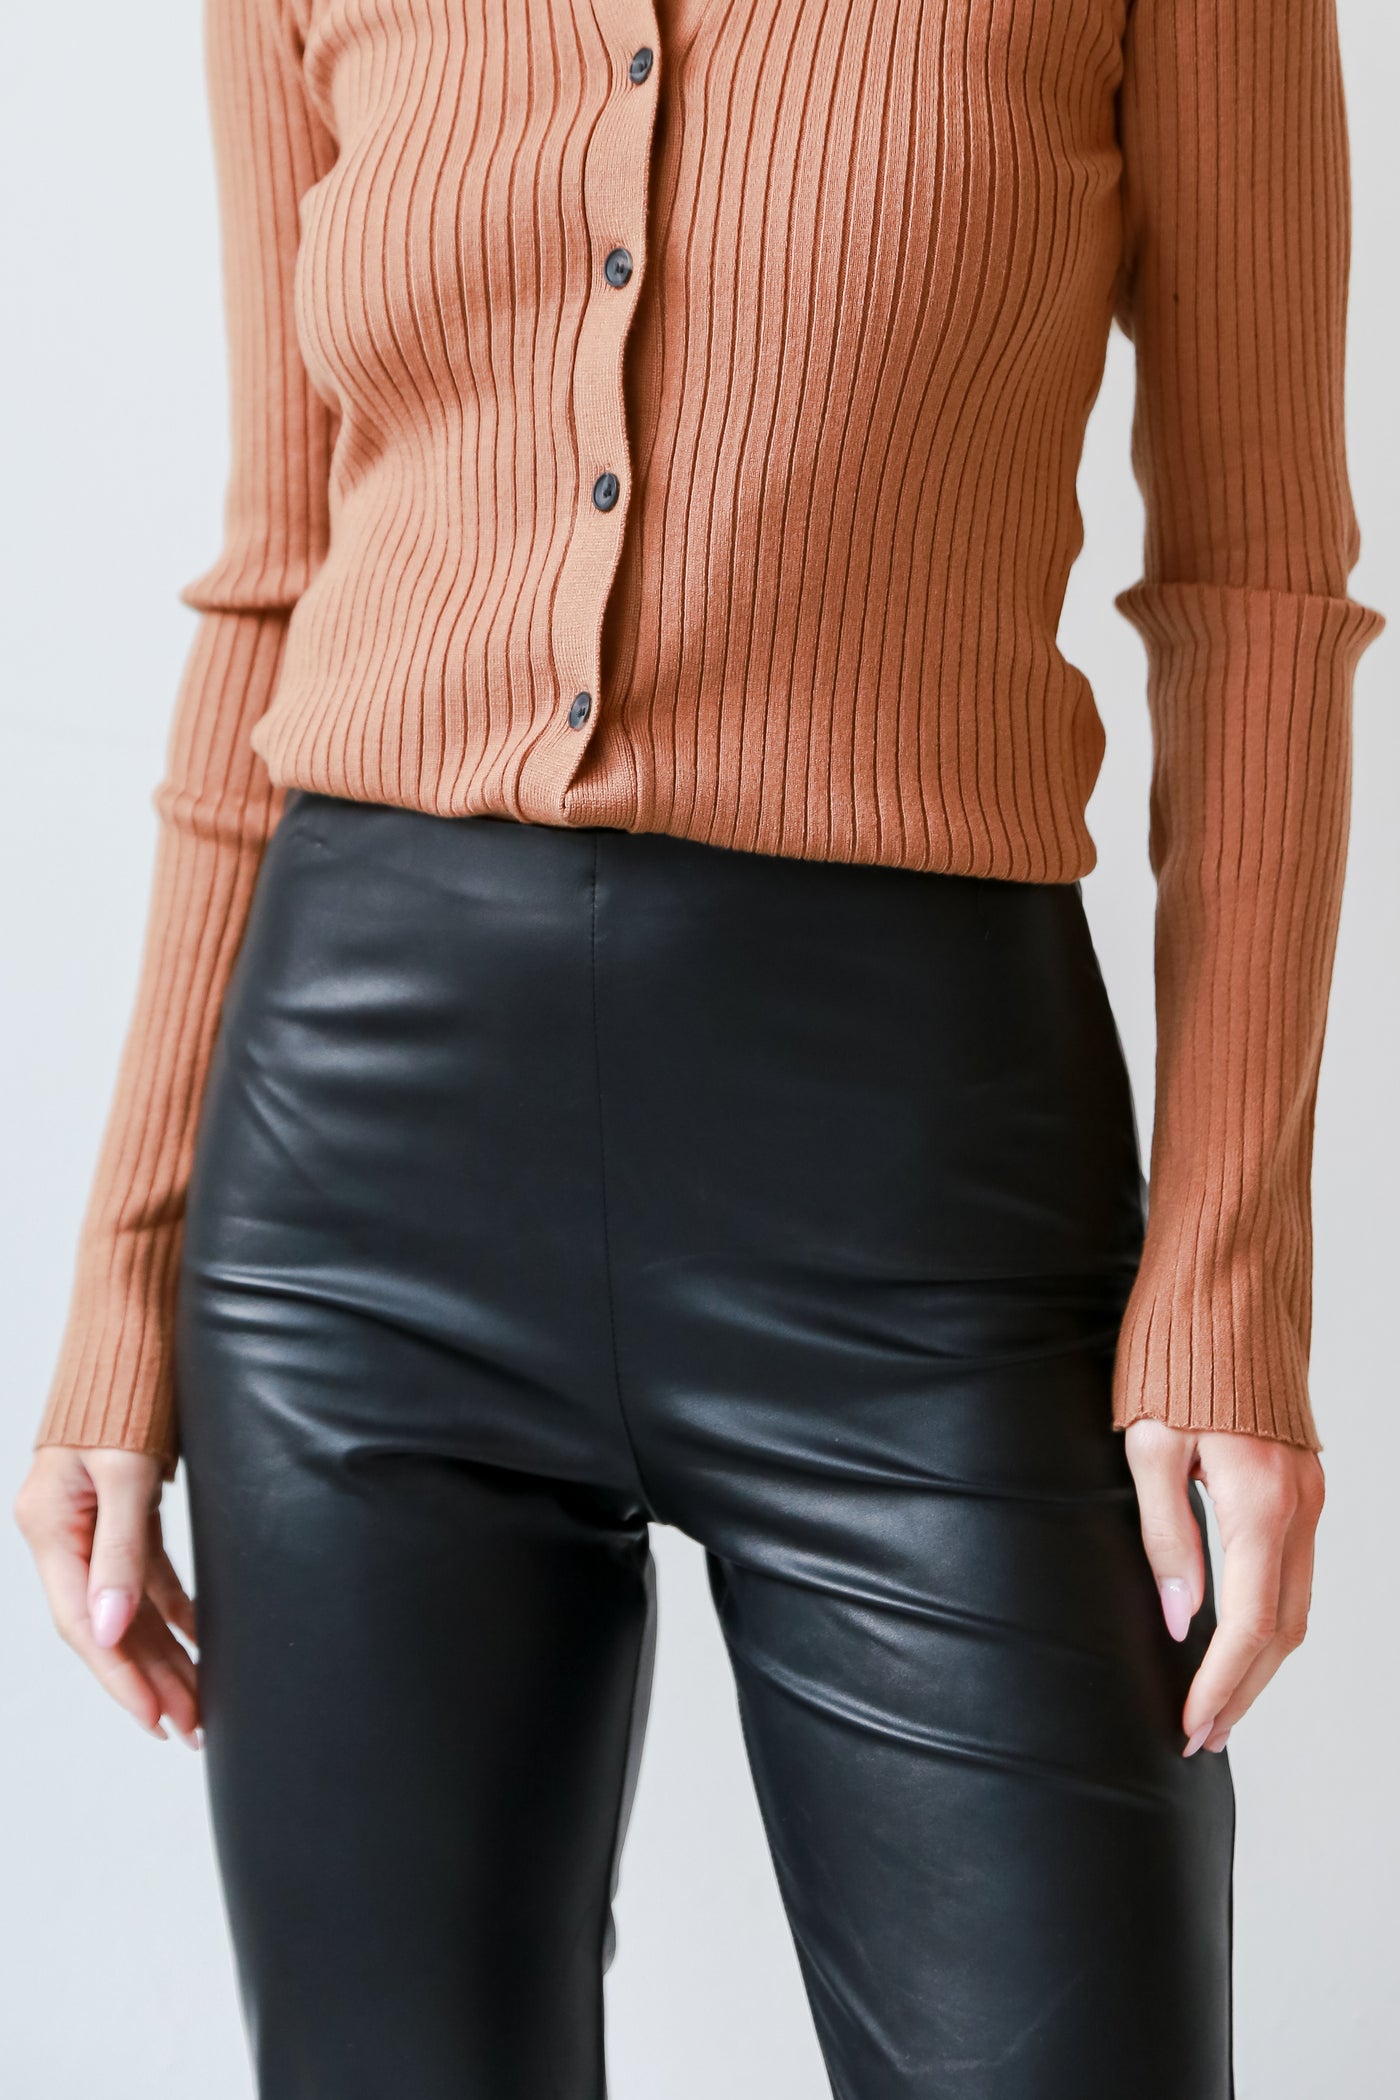 Black Leather Pants for women